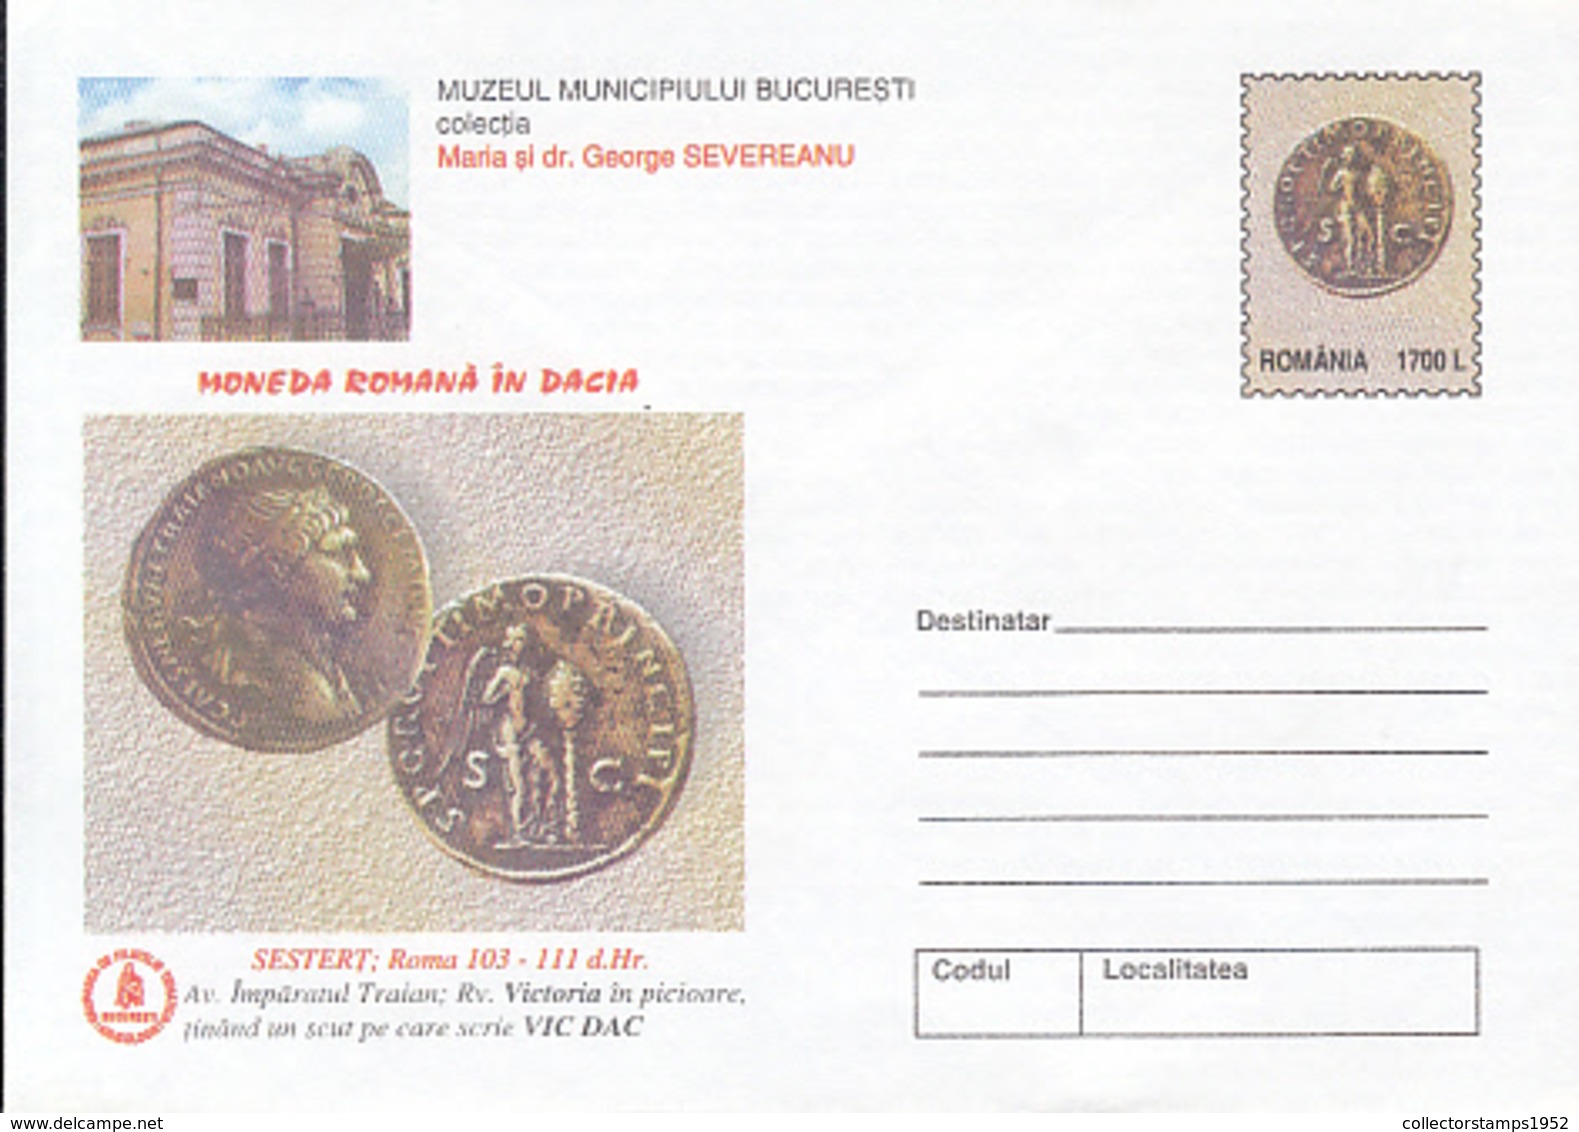 89367- ROMAN COIN IN DACIA, ANCIENT RELICS, ARCHAEOLOGY, COVER STATIONERY, 2000, ROMANIA - Archäologie